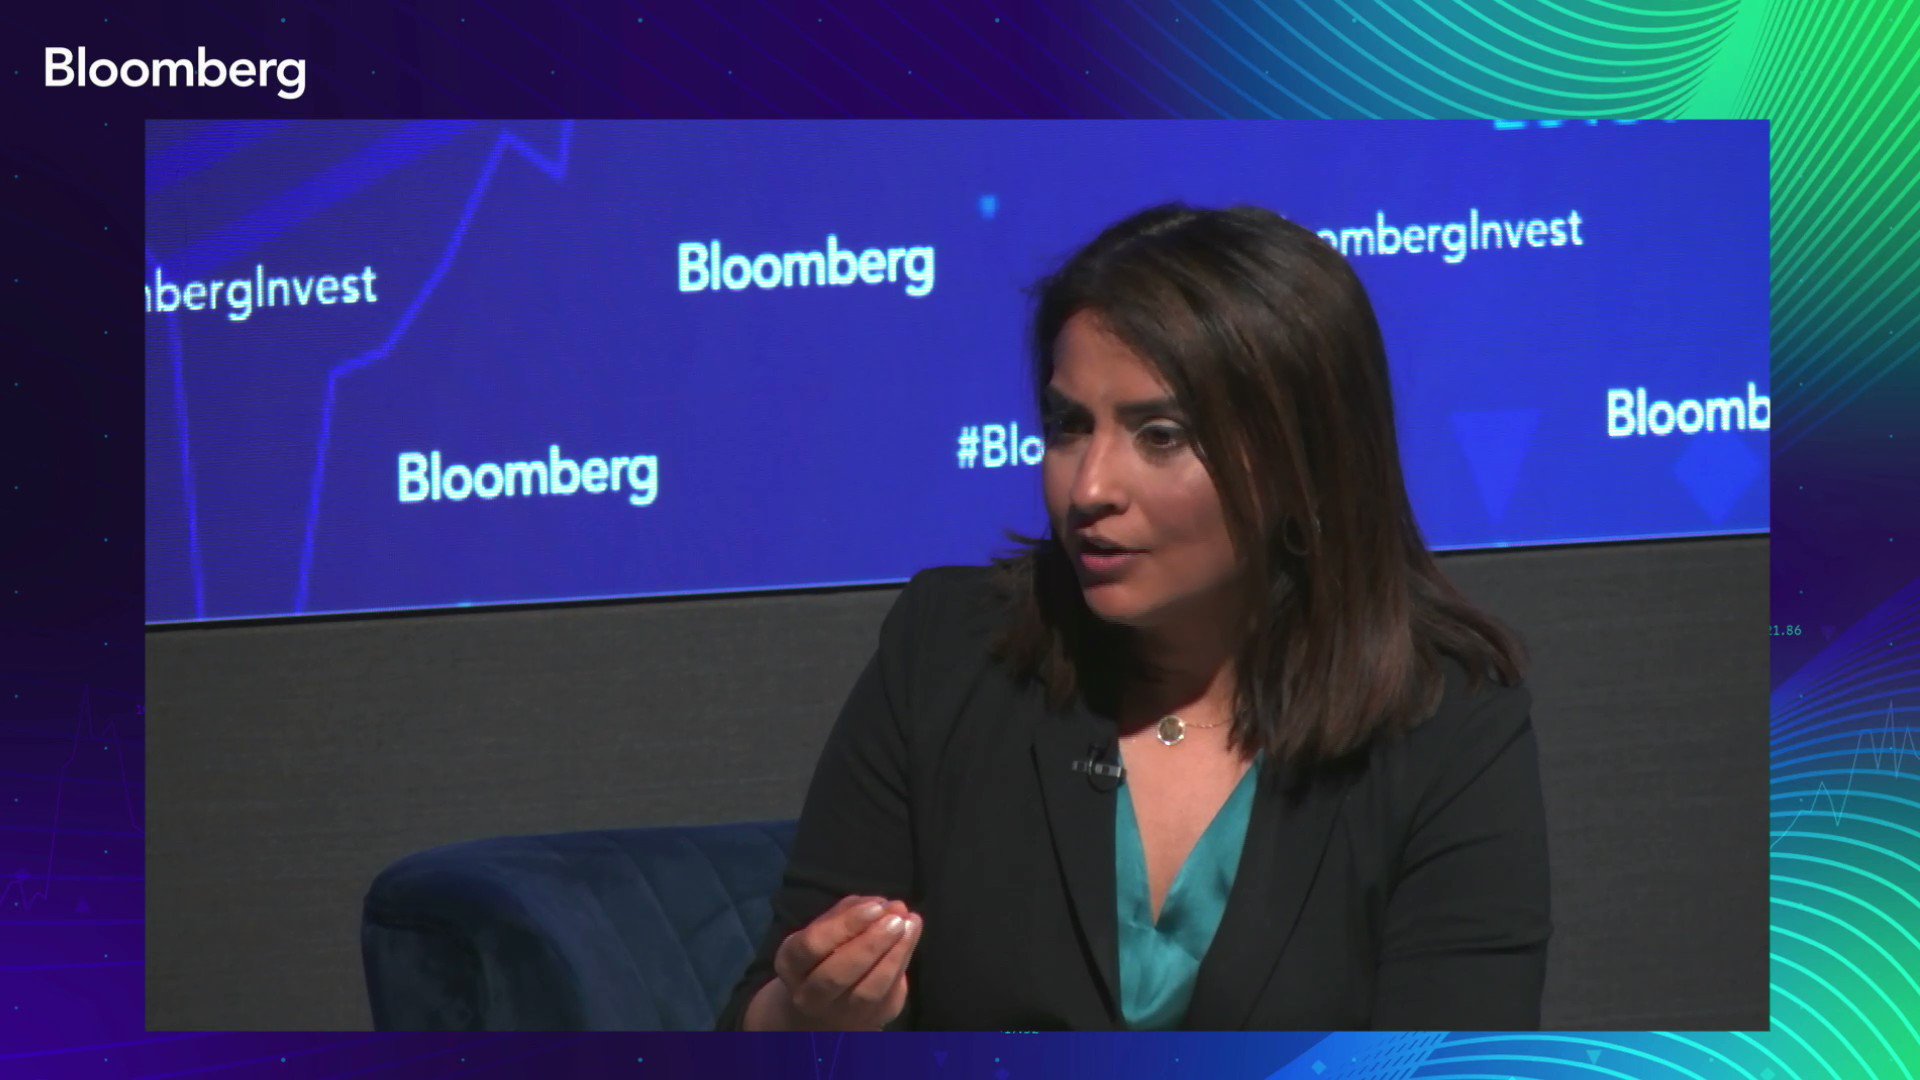 @BloombergLive: "Our mini-grids work with biomass covering the baseload, and solar coming in to cover the peaks at daytime." @MandulisEnergy Co-Founder @PeteBenHurNyeko #BloombergInvest